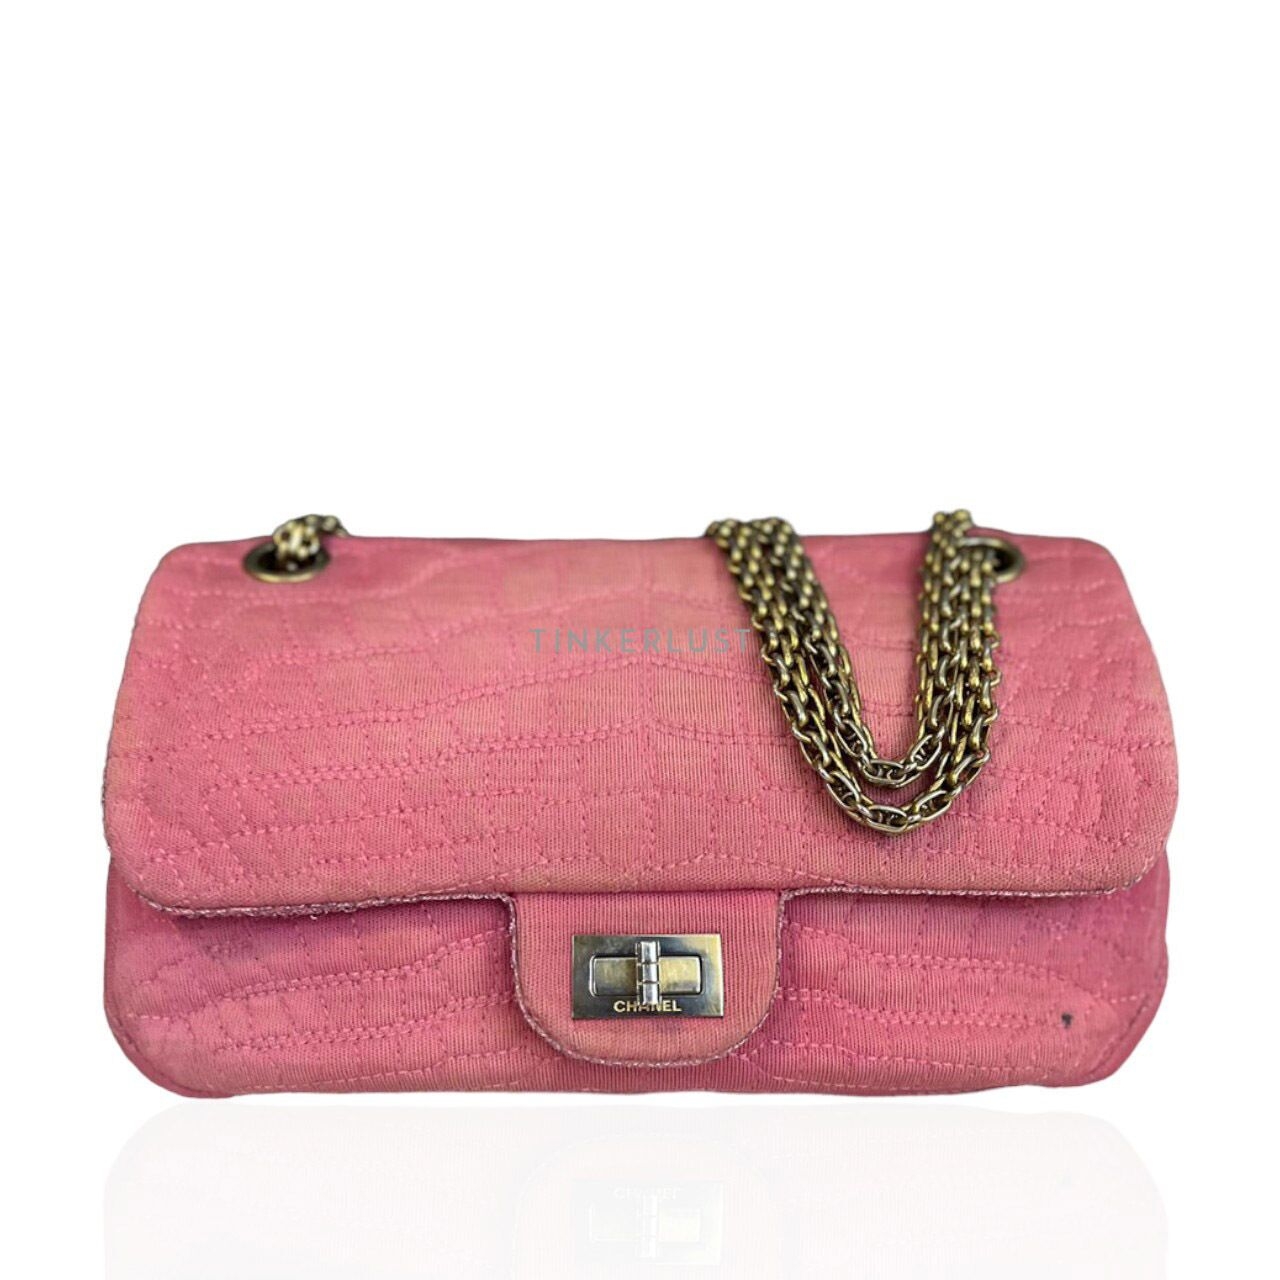 Chanel Reissue Small Pink Jersey Croco #11 GHW Shoulder Bag